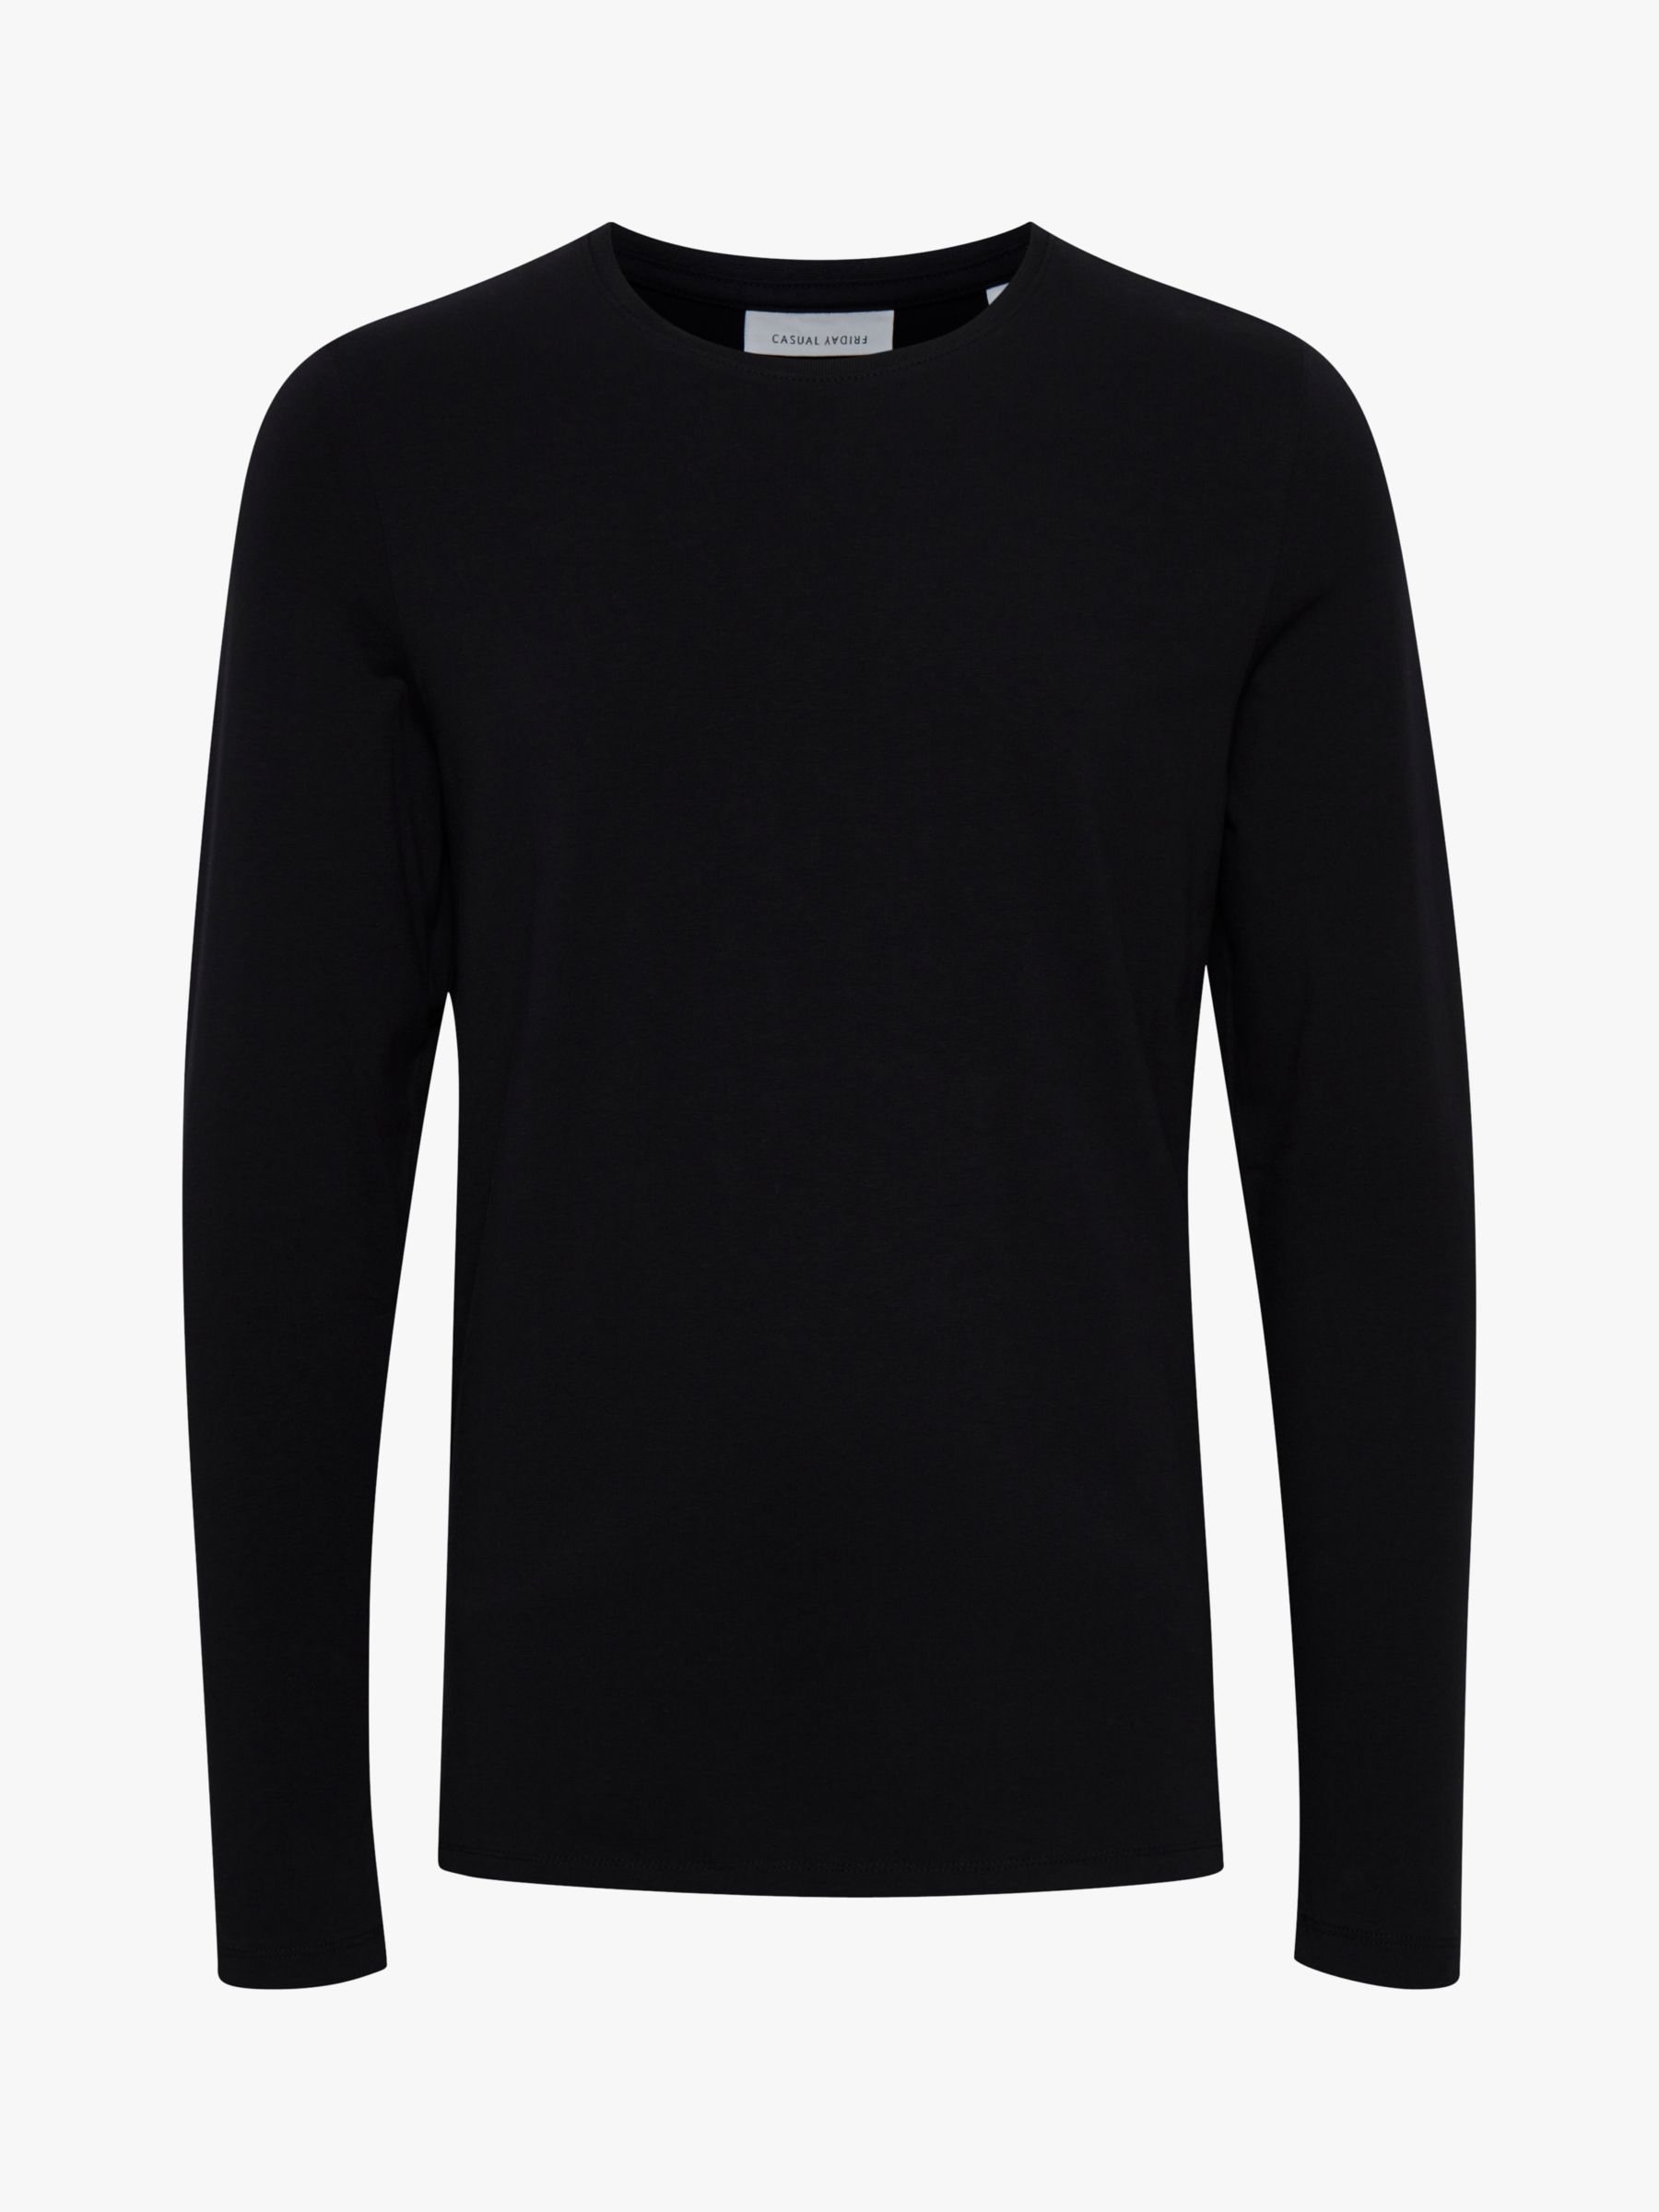 Casual Friday Theo Long Sleeve Basic T-Shirt, Anthracite Black, S